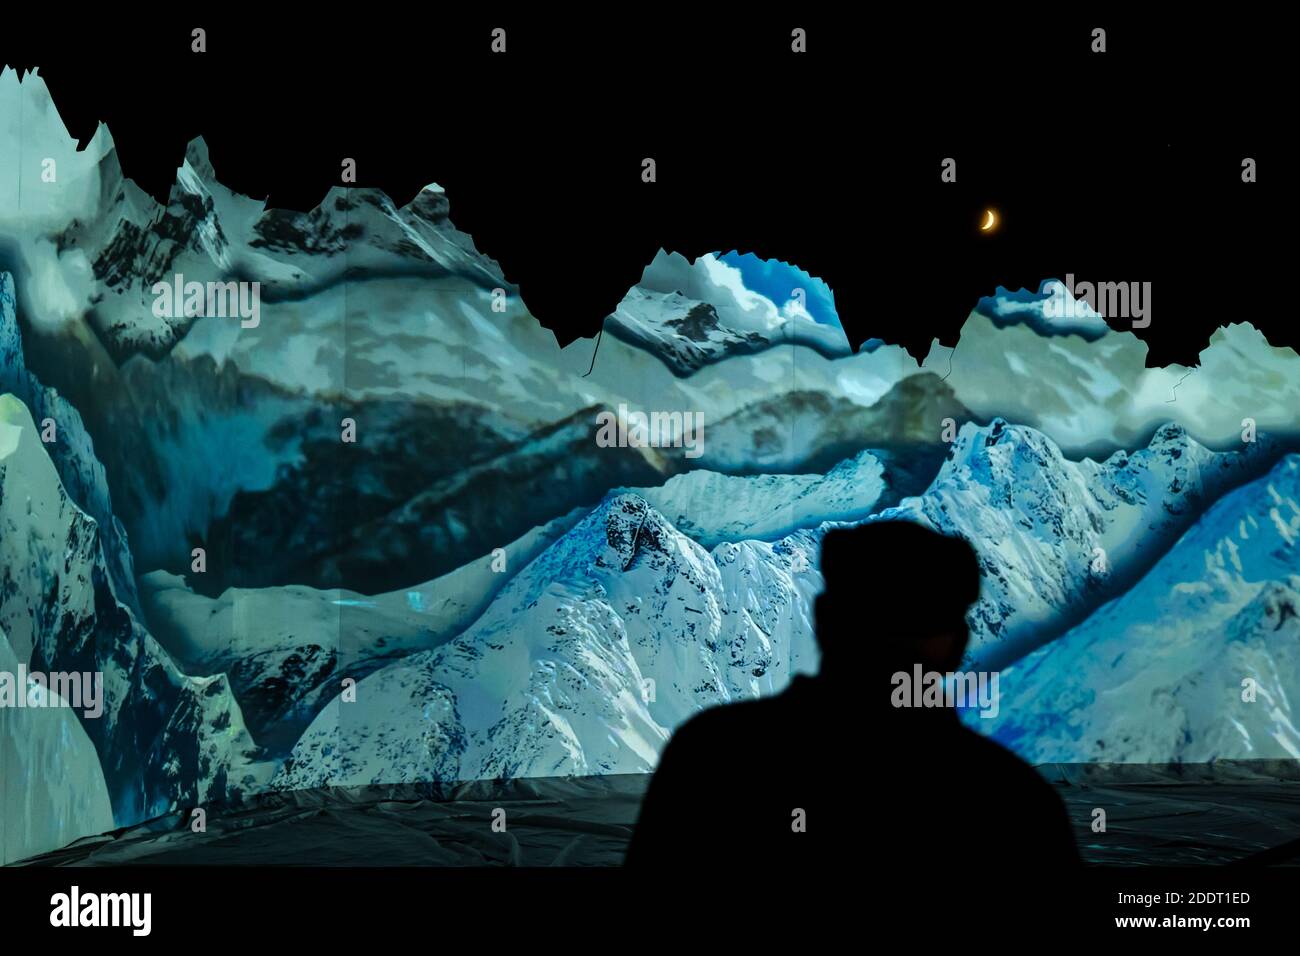 Silhouette of man watching Winter mountain landscape projection with crescent moon, Edinburgh Zoo, Scotland, UK Stock Photo